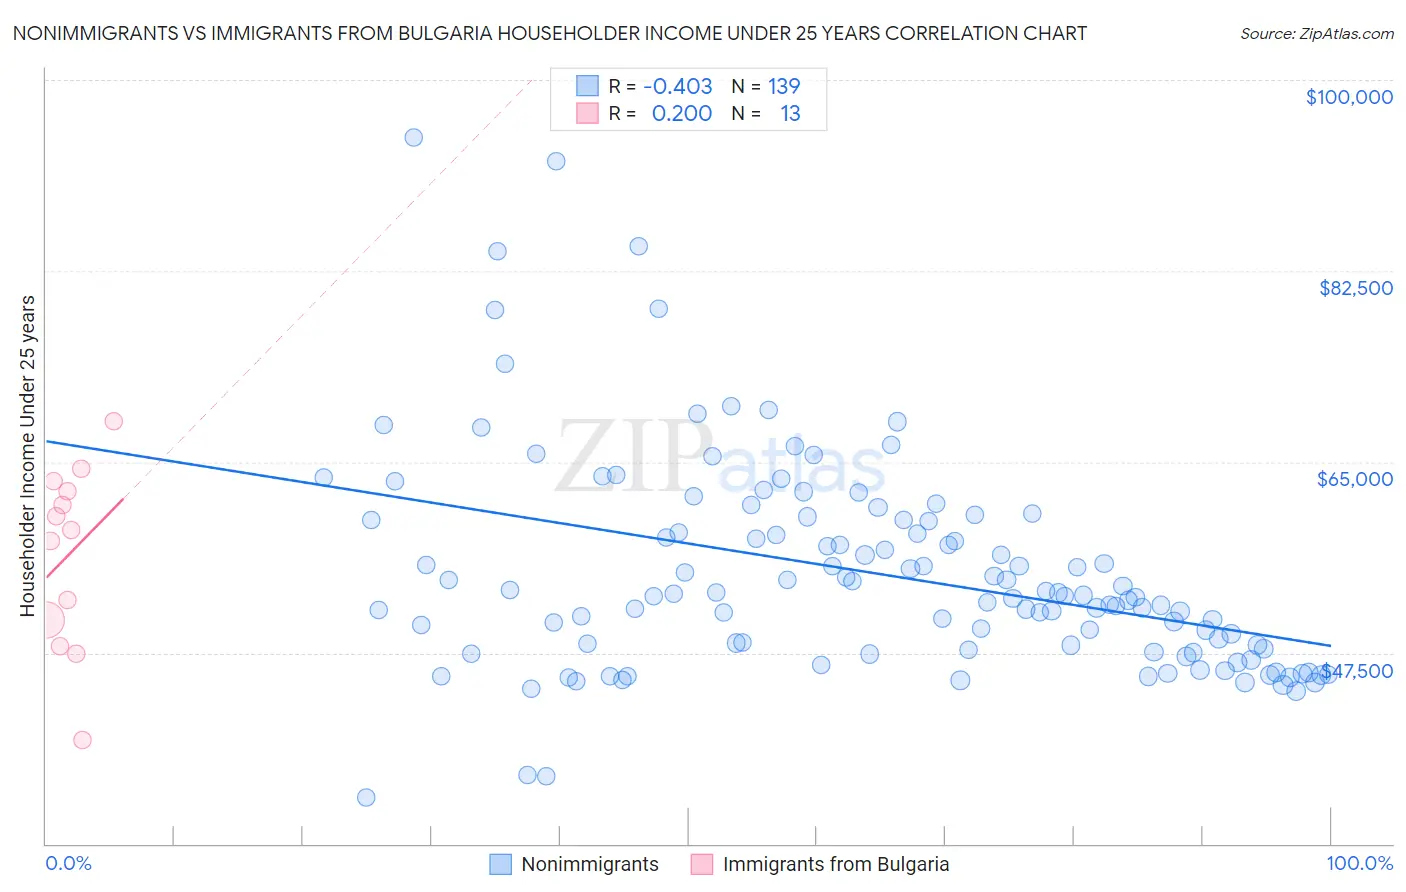 Nonimmigrants vs Immigrants from Bulgaria Householder Income Under 25 years